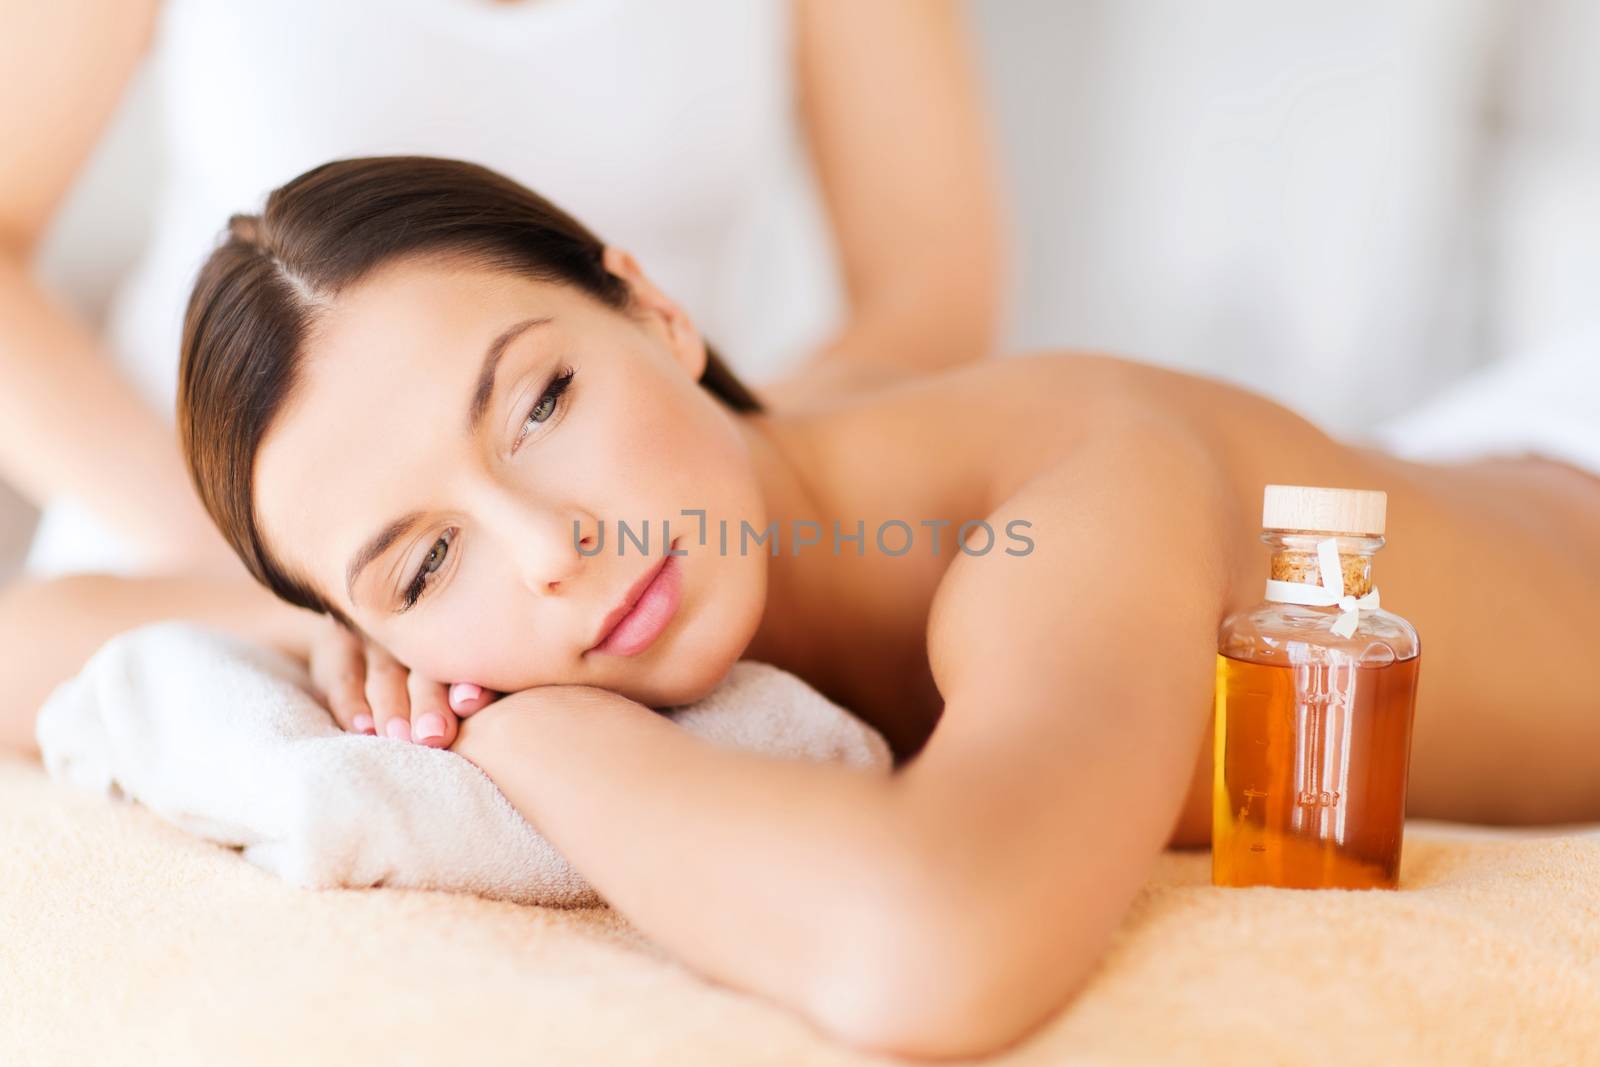 beauty and spa concept - beautiful woman in spa salon getting oil treatment